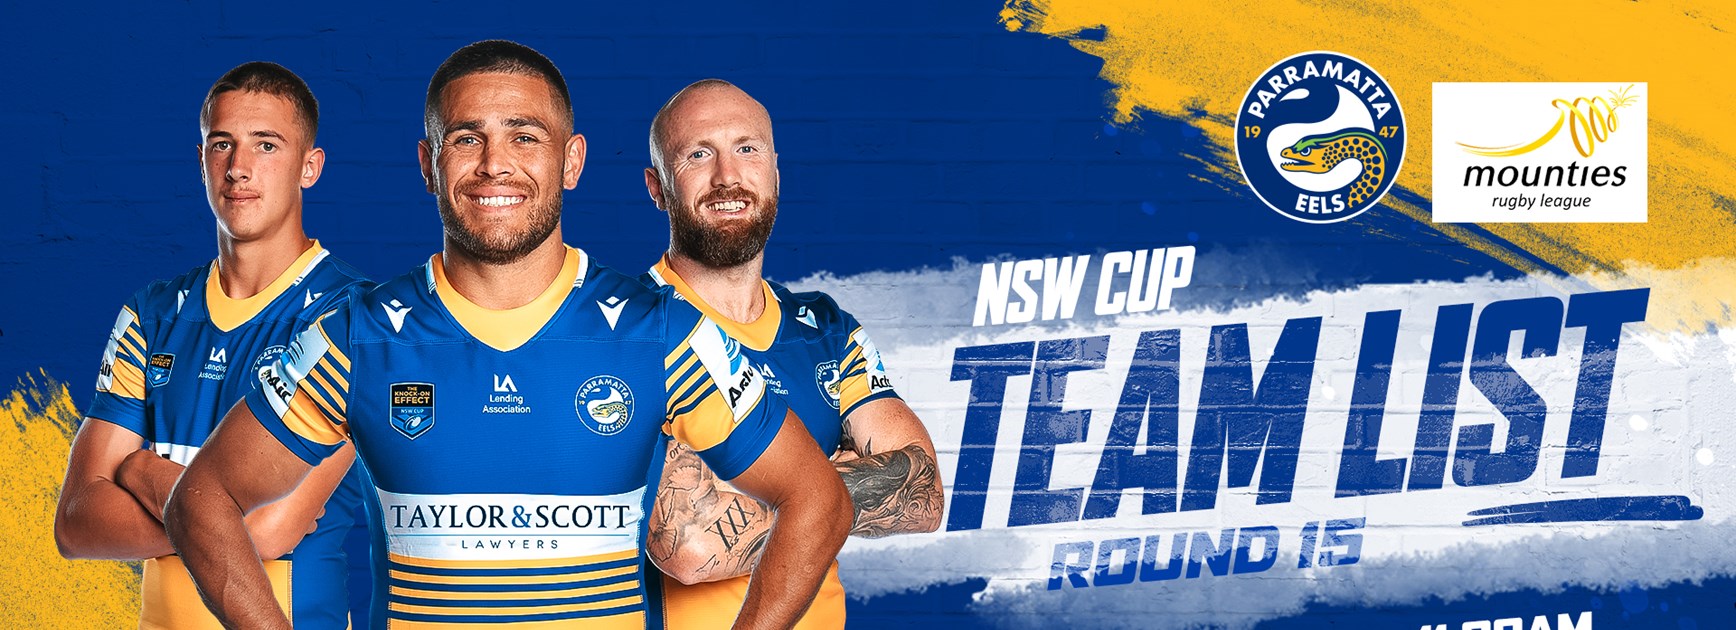 NSW Cup Team List - Eels v Mounties, Round 15